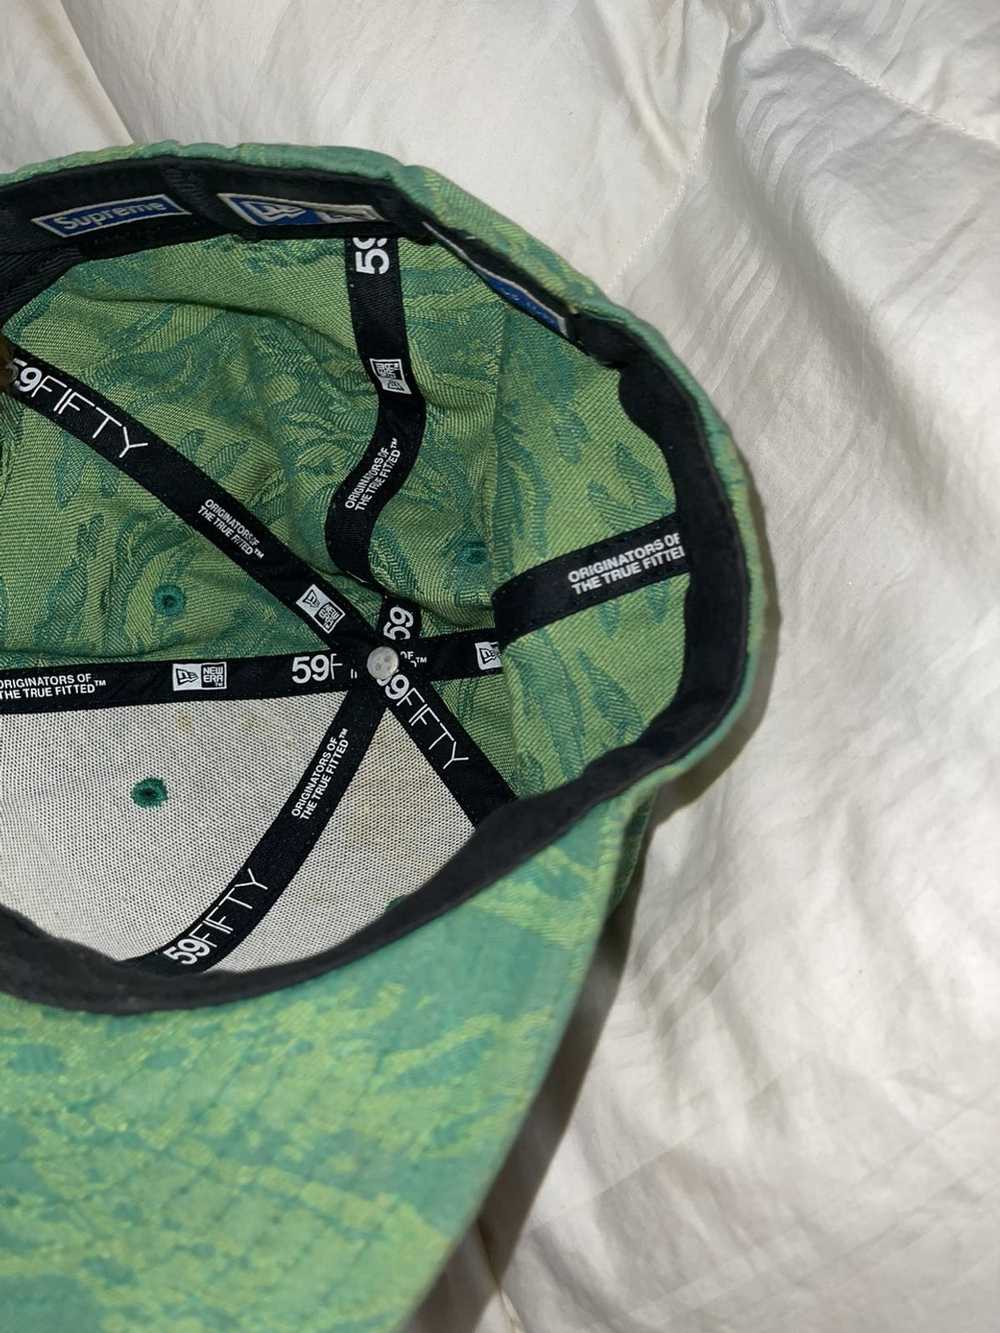 Supreme x New Era Cross Flags Blue Fitted Hat (Size 7) — Roots